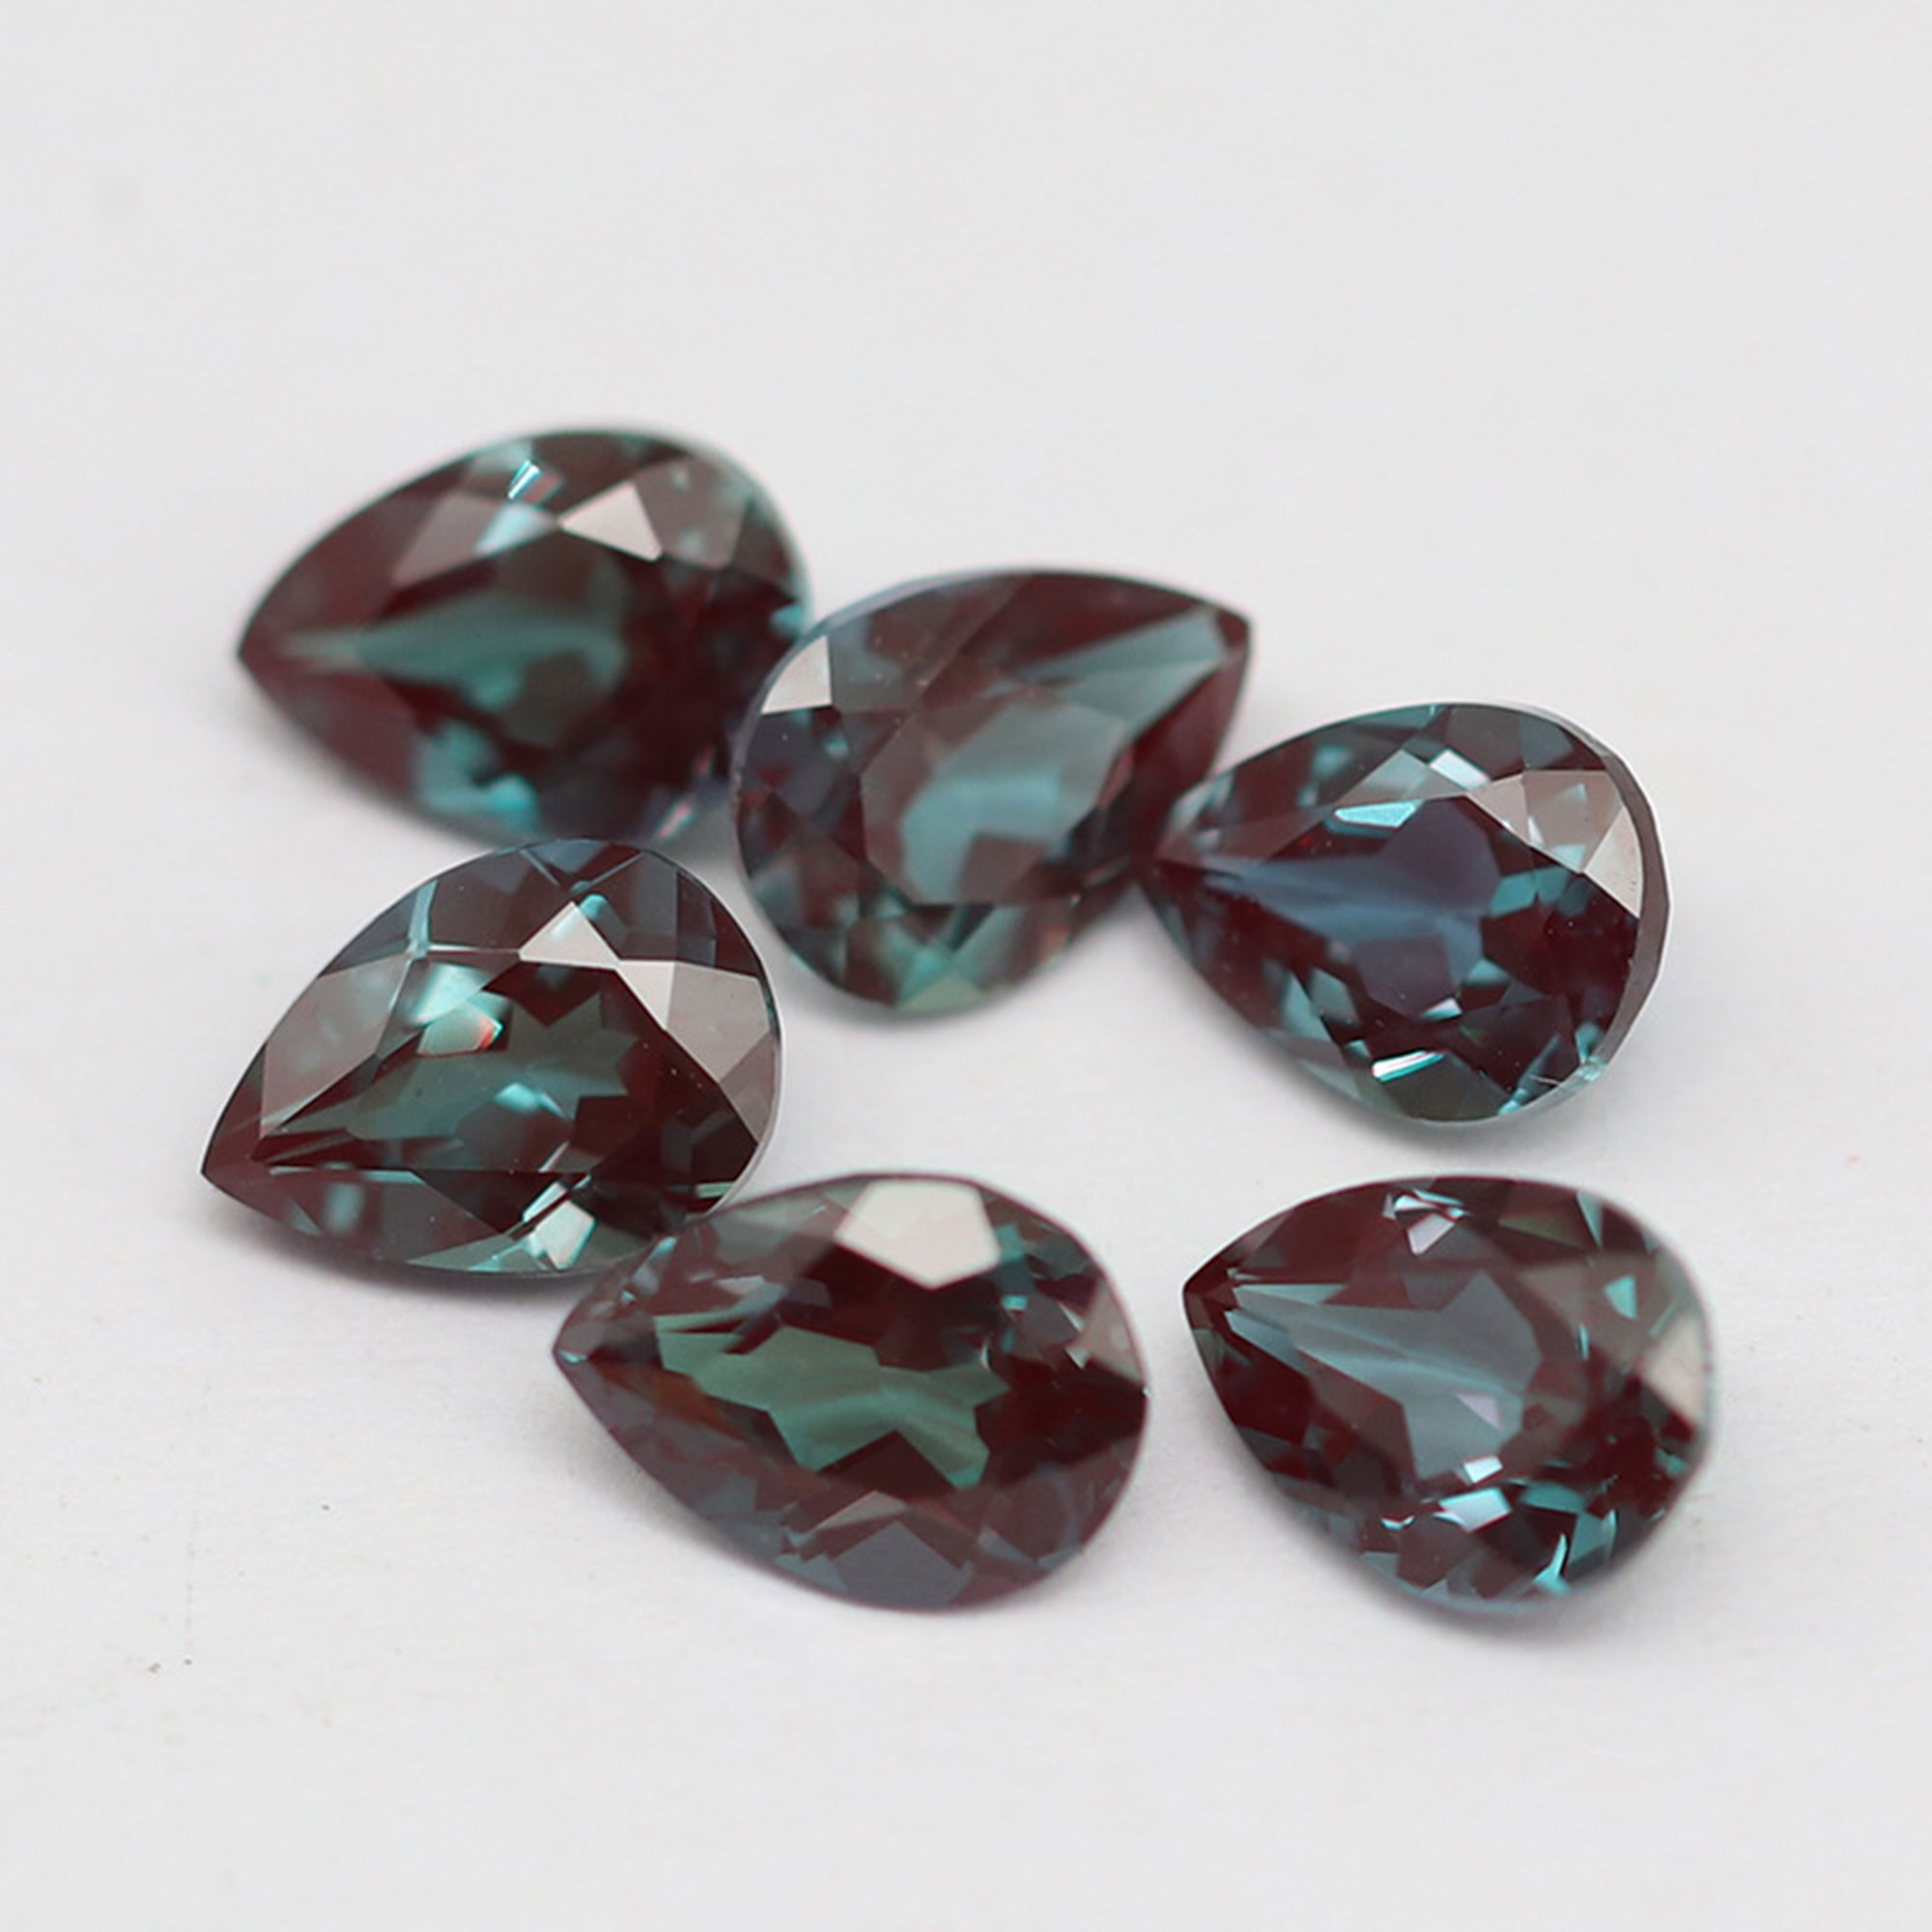 Lab Grown Alexandrite Faceted Gemstone,Pear Color Change Stone,June Birthstone,DIY Loose Gemstone Supplies 4150027 - Click Image to Close